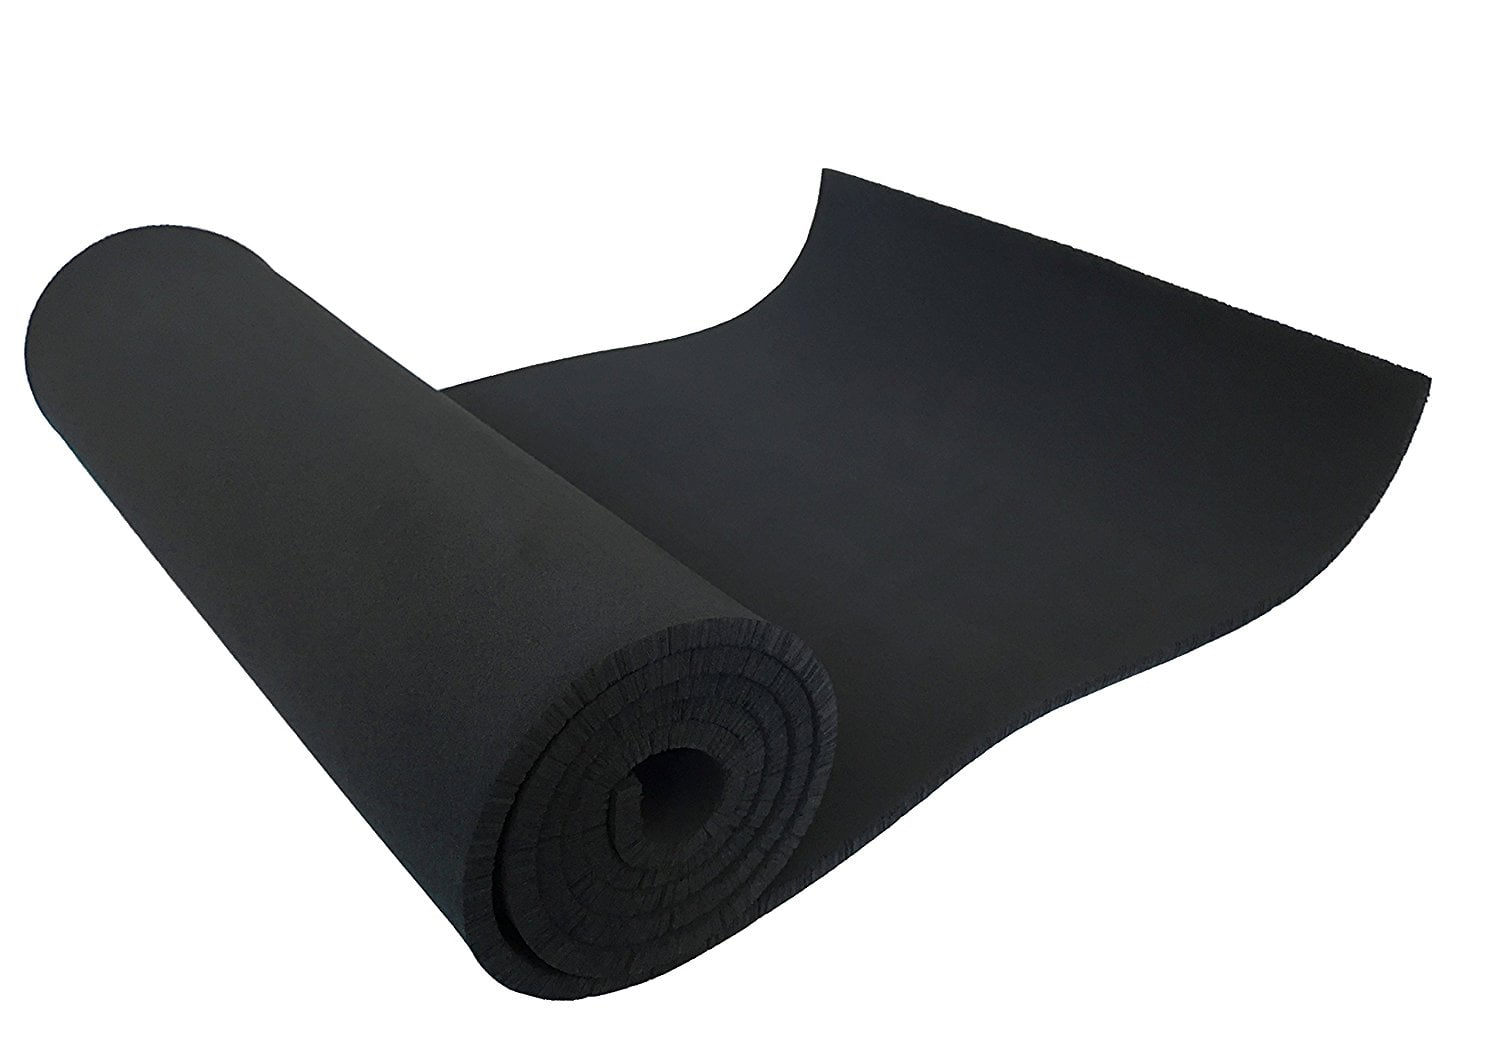 6mm Rubber Neoprene Roll Padding Mat for Weather Stripping and Cosplay 54" x 12" 